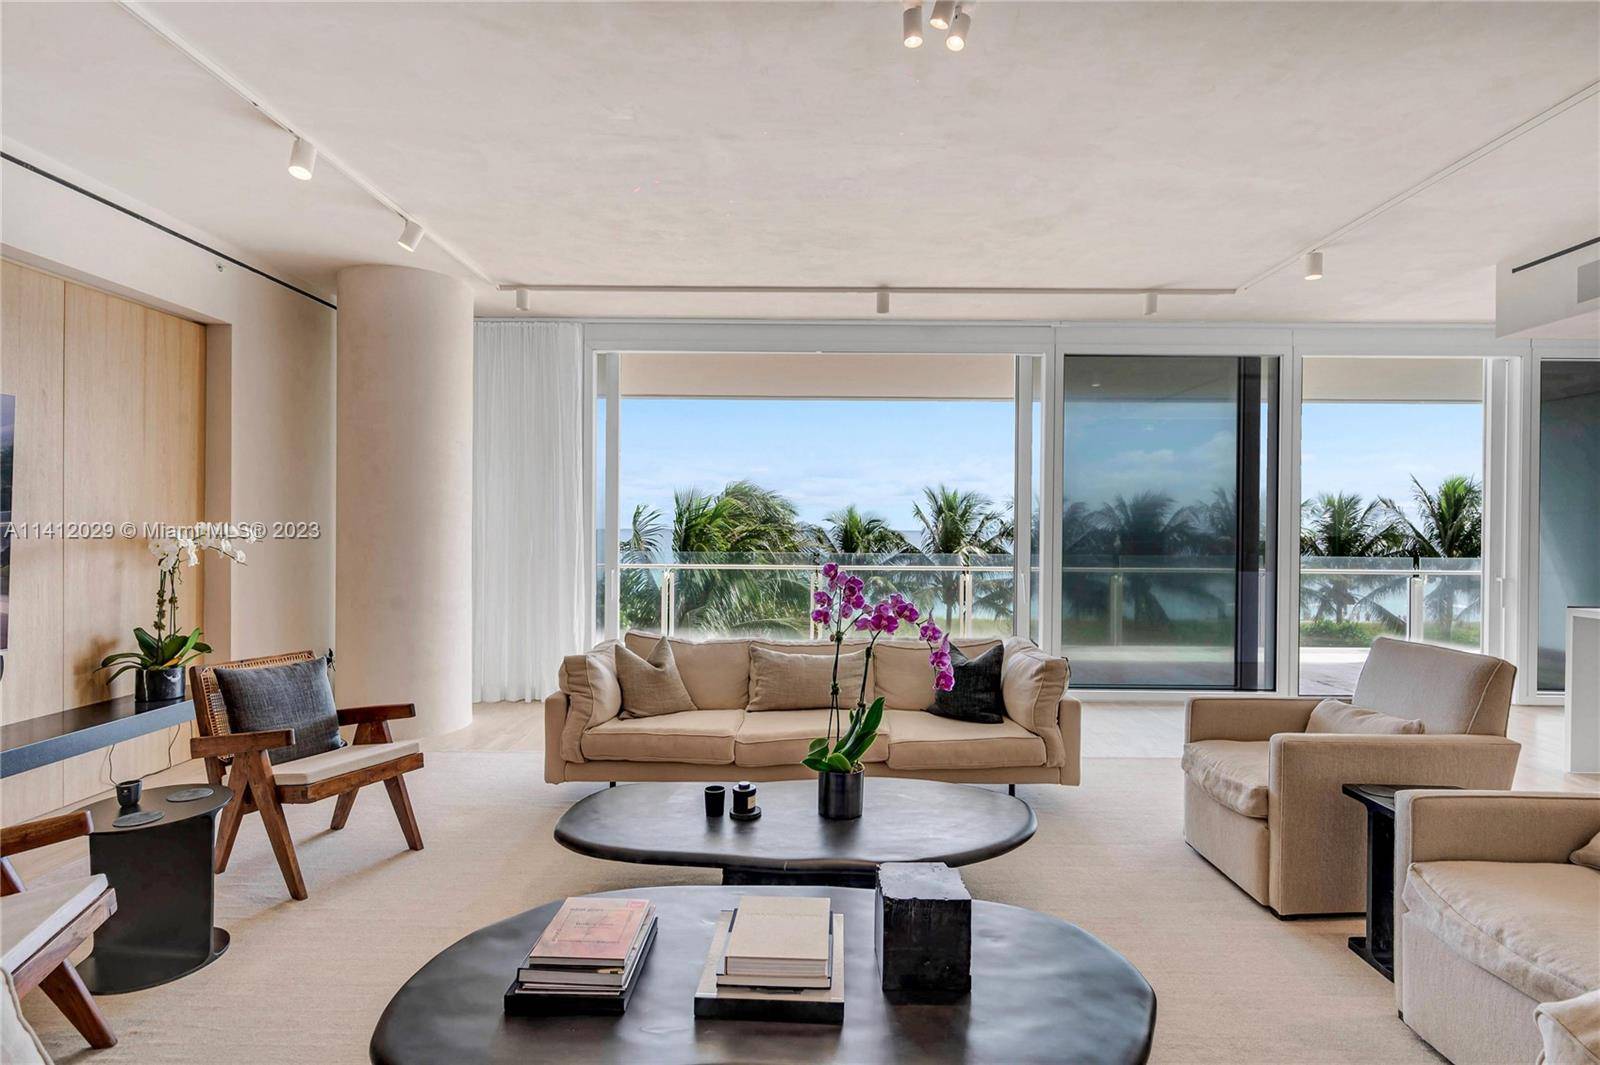 Experience the LEGENDARY FOUR SEASONS LIFESTYLE from this one of a kind CORNER OCEAN VIEW UNIT at The Surf Club.